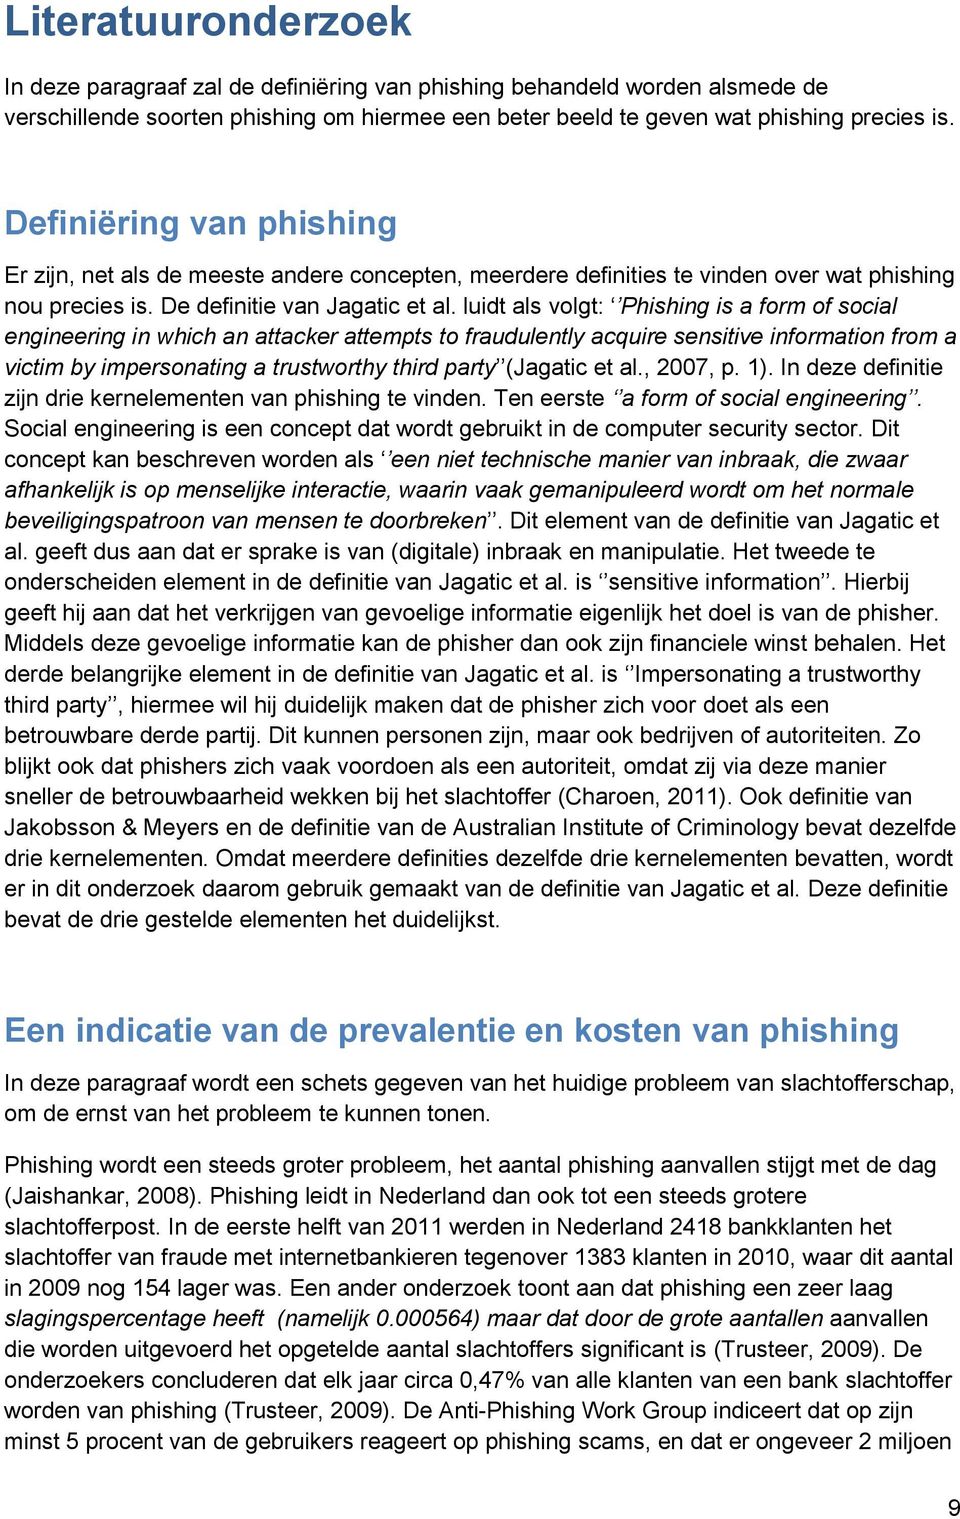 luidt als volgt: Phishing is a form of social engineering in which an attacker attempts to fraudulently acquire sensitive information from a victim by impersonating a trustworthy third party (Jagatic